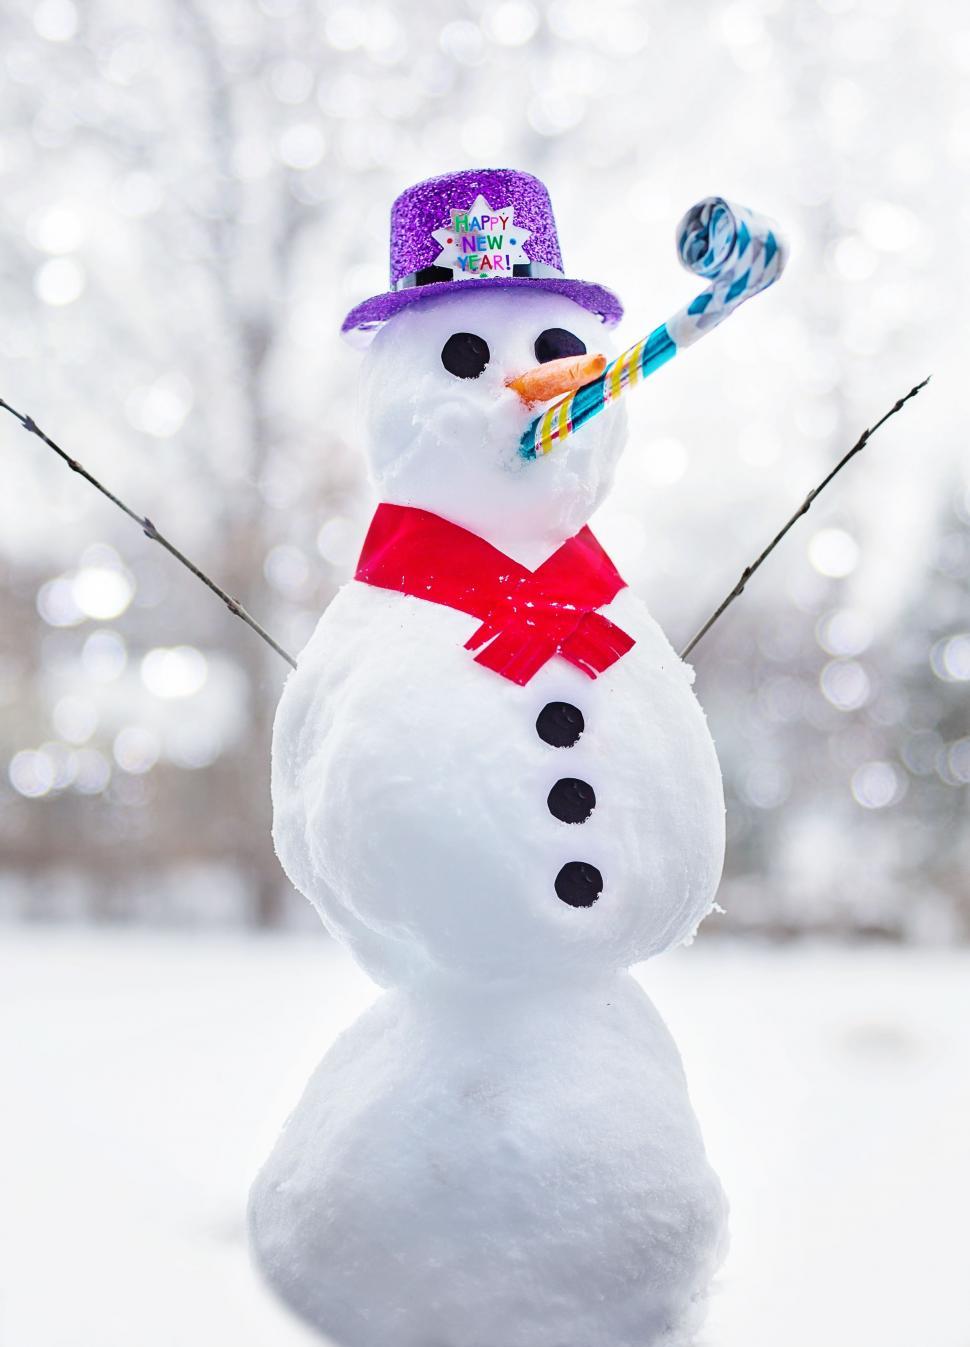 Free Image of Snowman - Happy New Year  